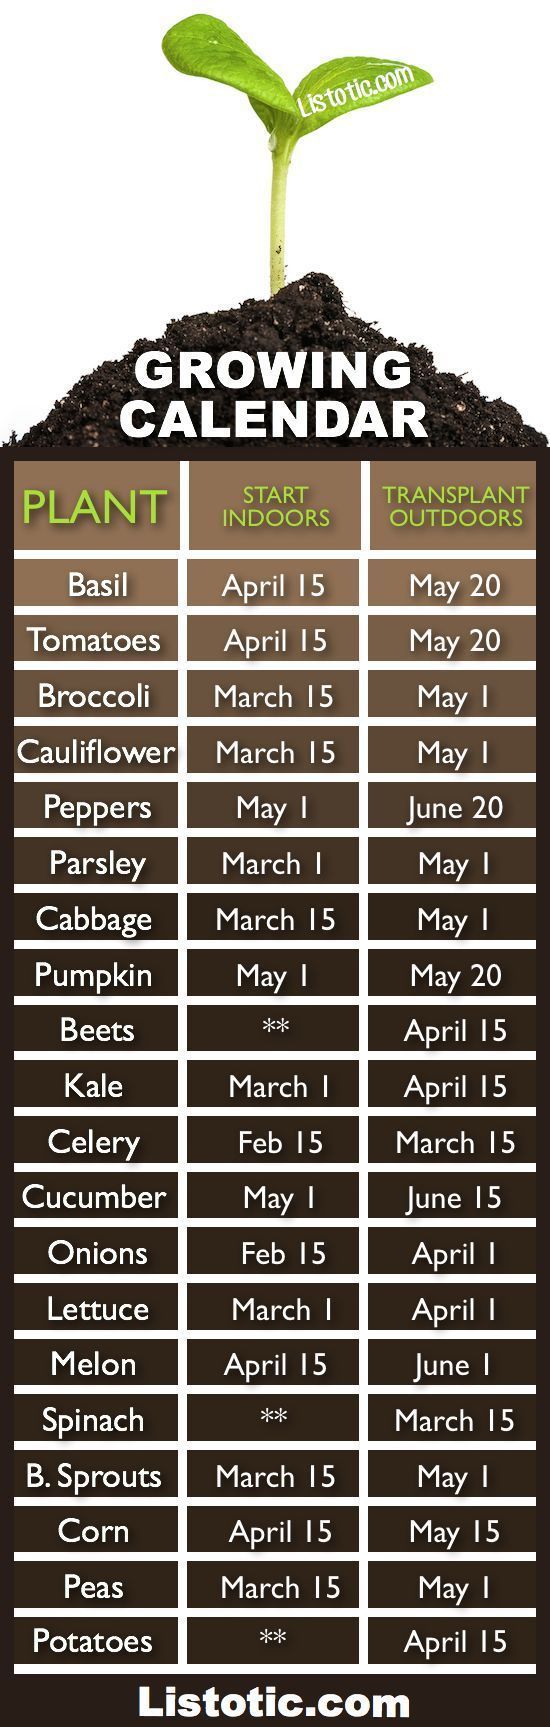 Vegetable garden growing calendar with starting and transplanting dates. If only I had a green thumb, Ill stick to my silk flowers